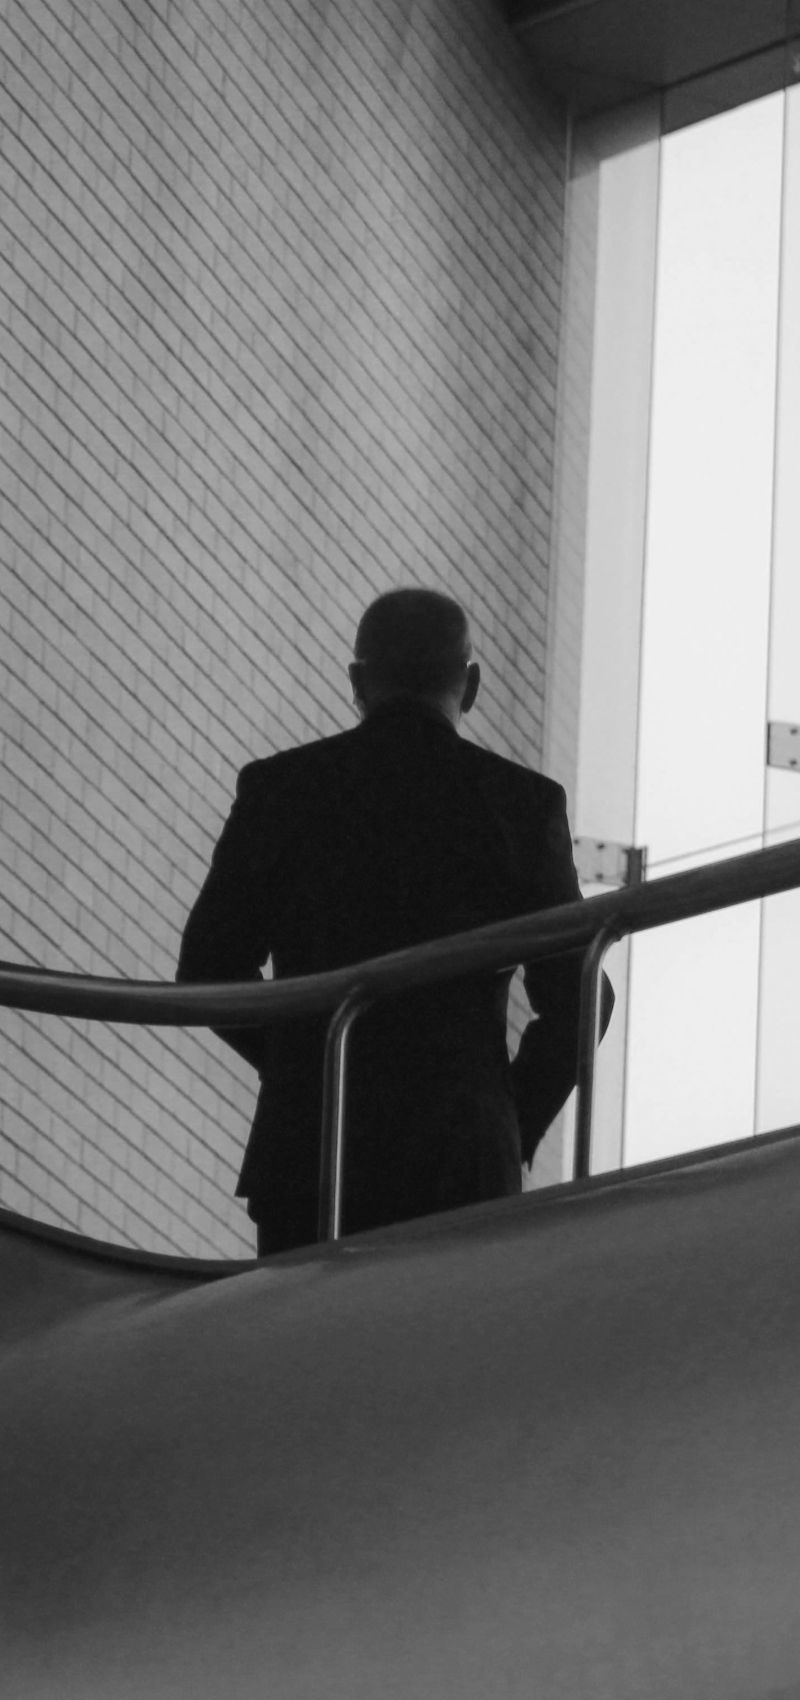 Man in suit leaning against a stairway rail looking at his phone